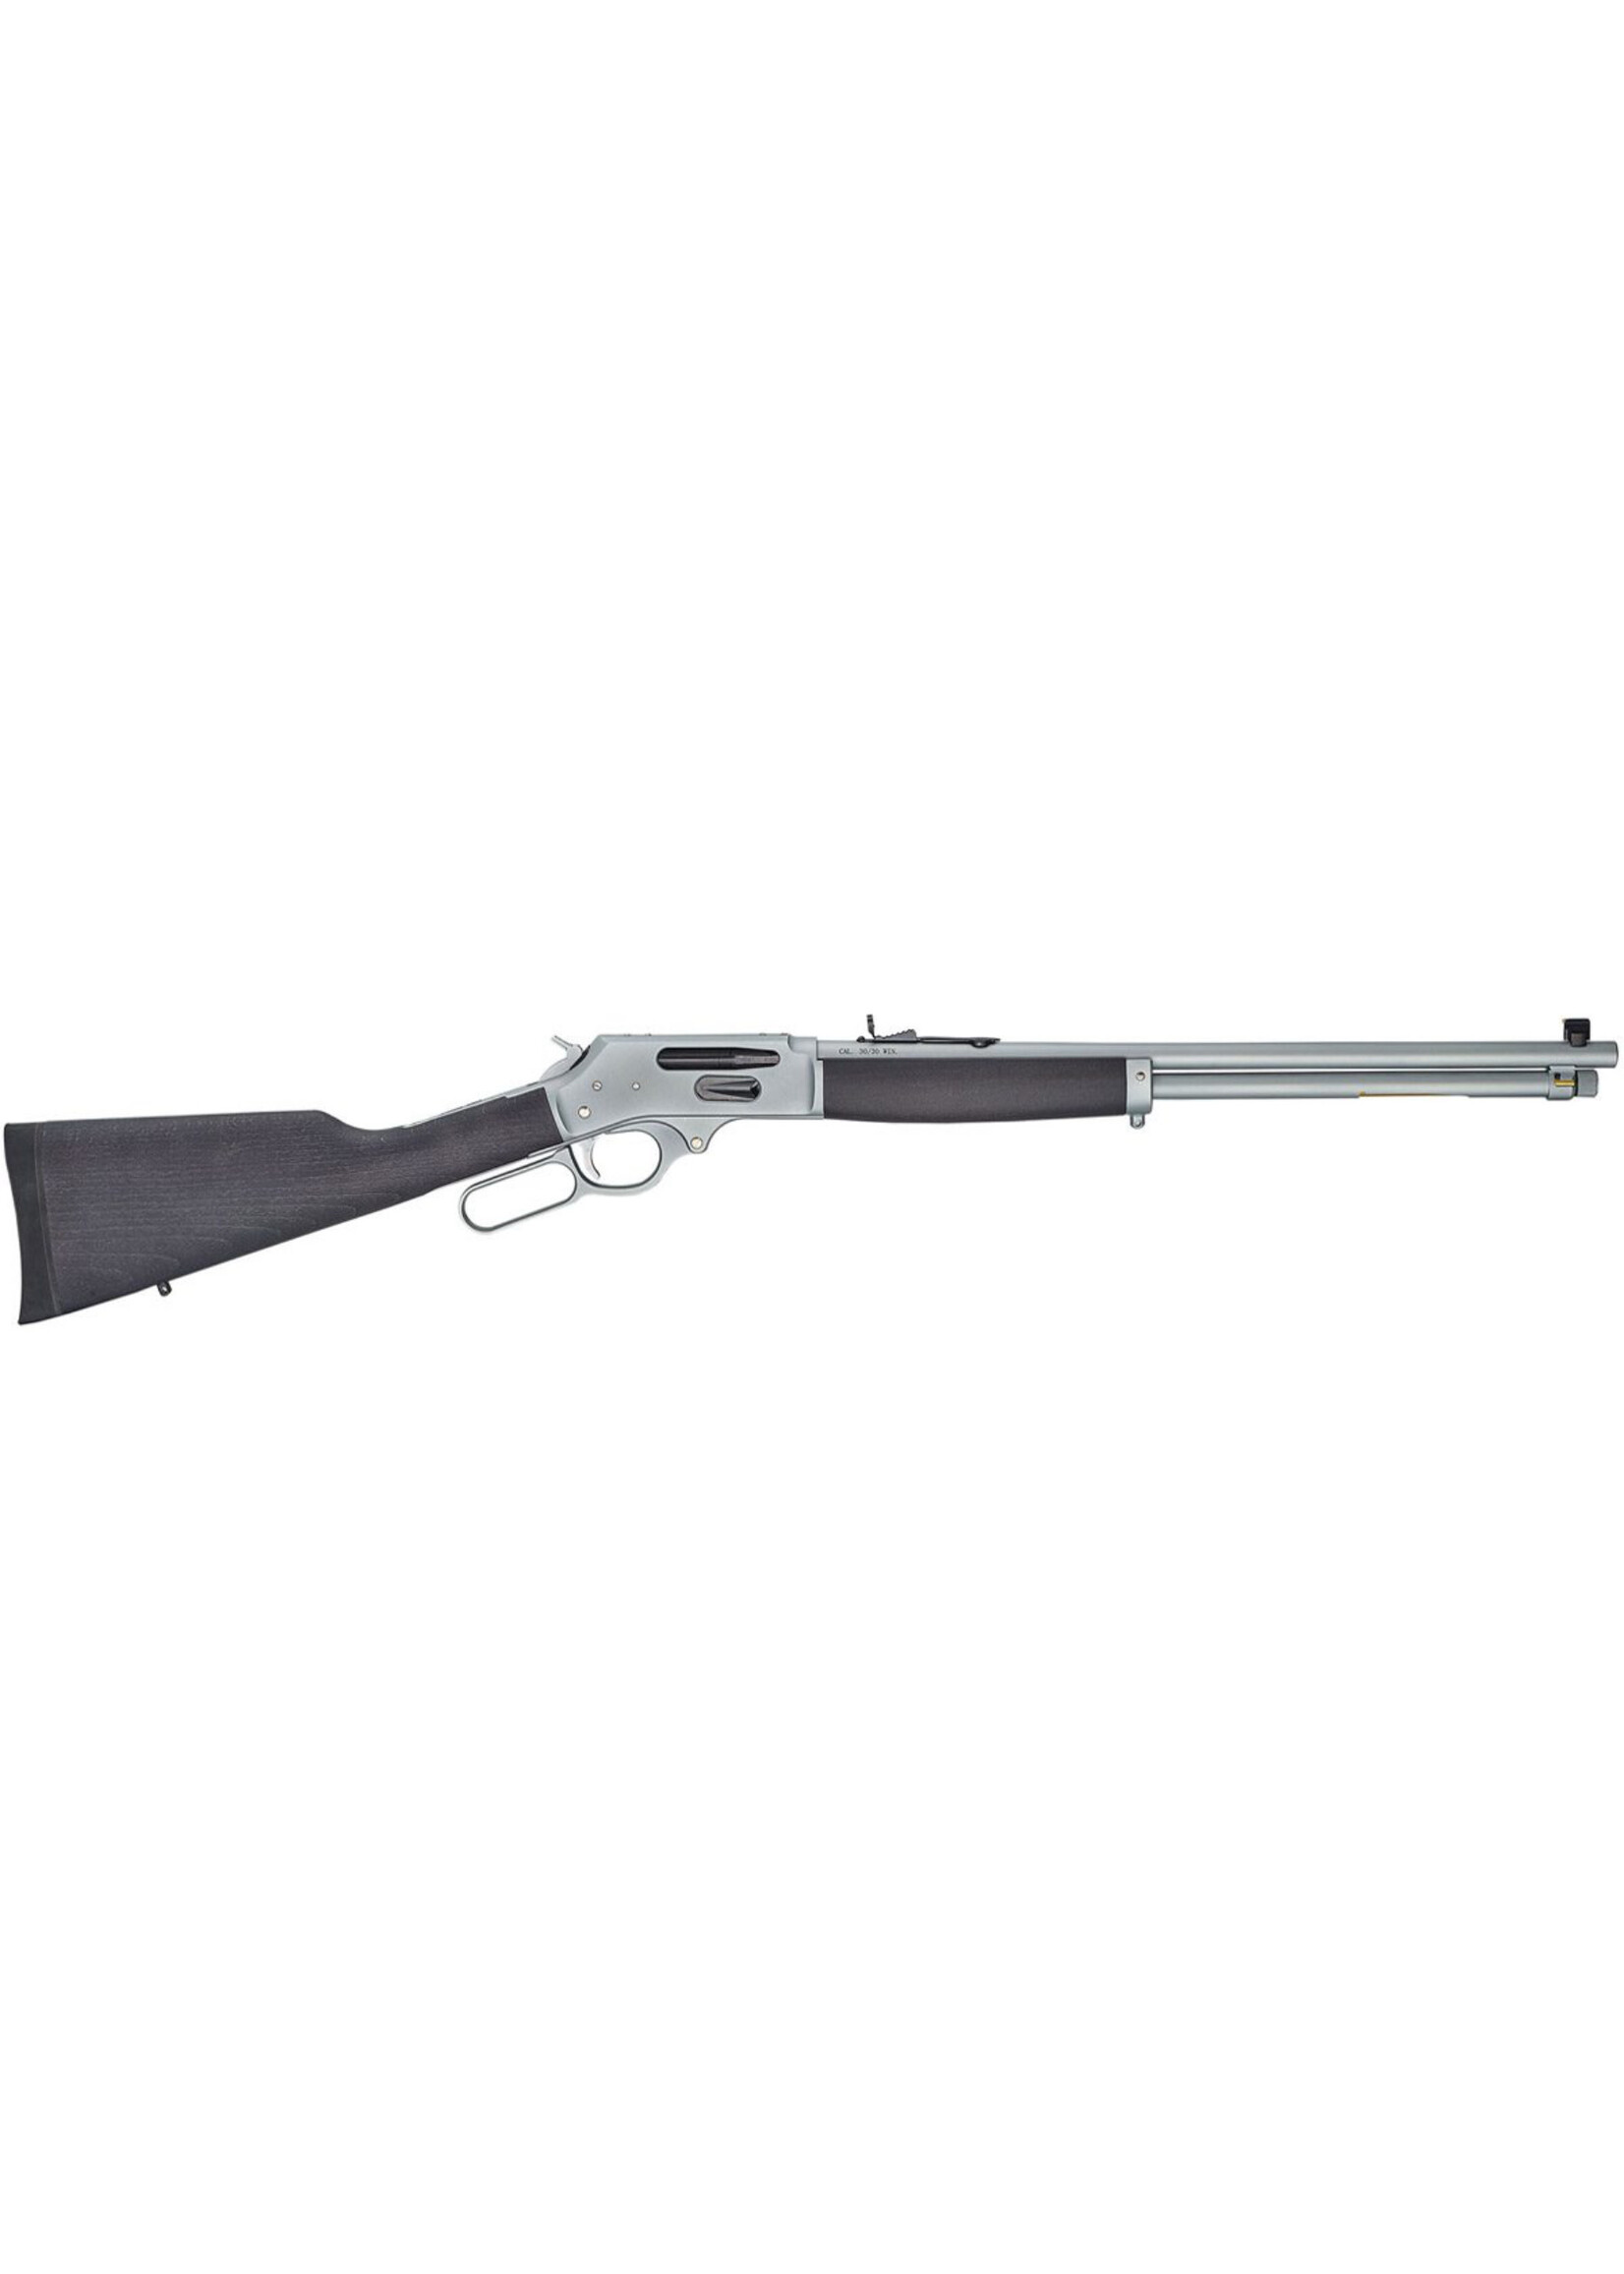 HENRY HENRY 30-30 WIN H009GAW ALL WEATHER SIDE GATE LEVER ACTION 5 RDS 20” BRL